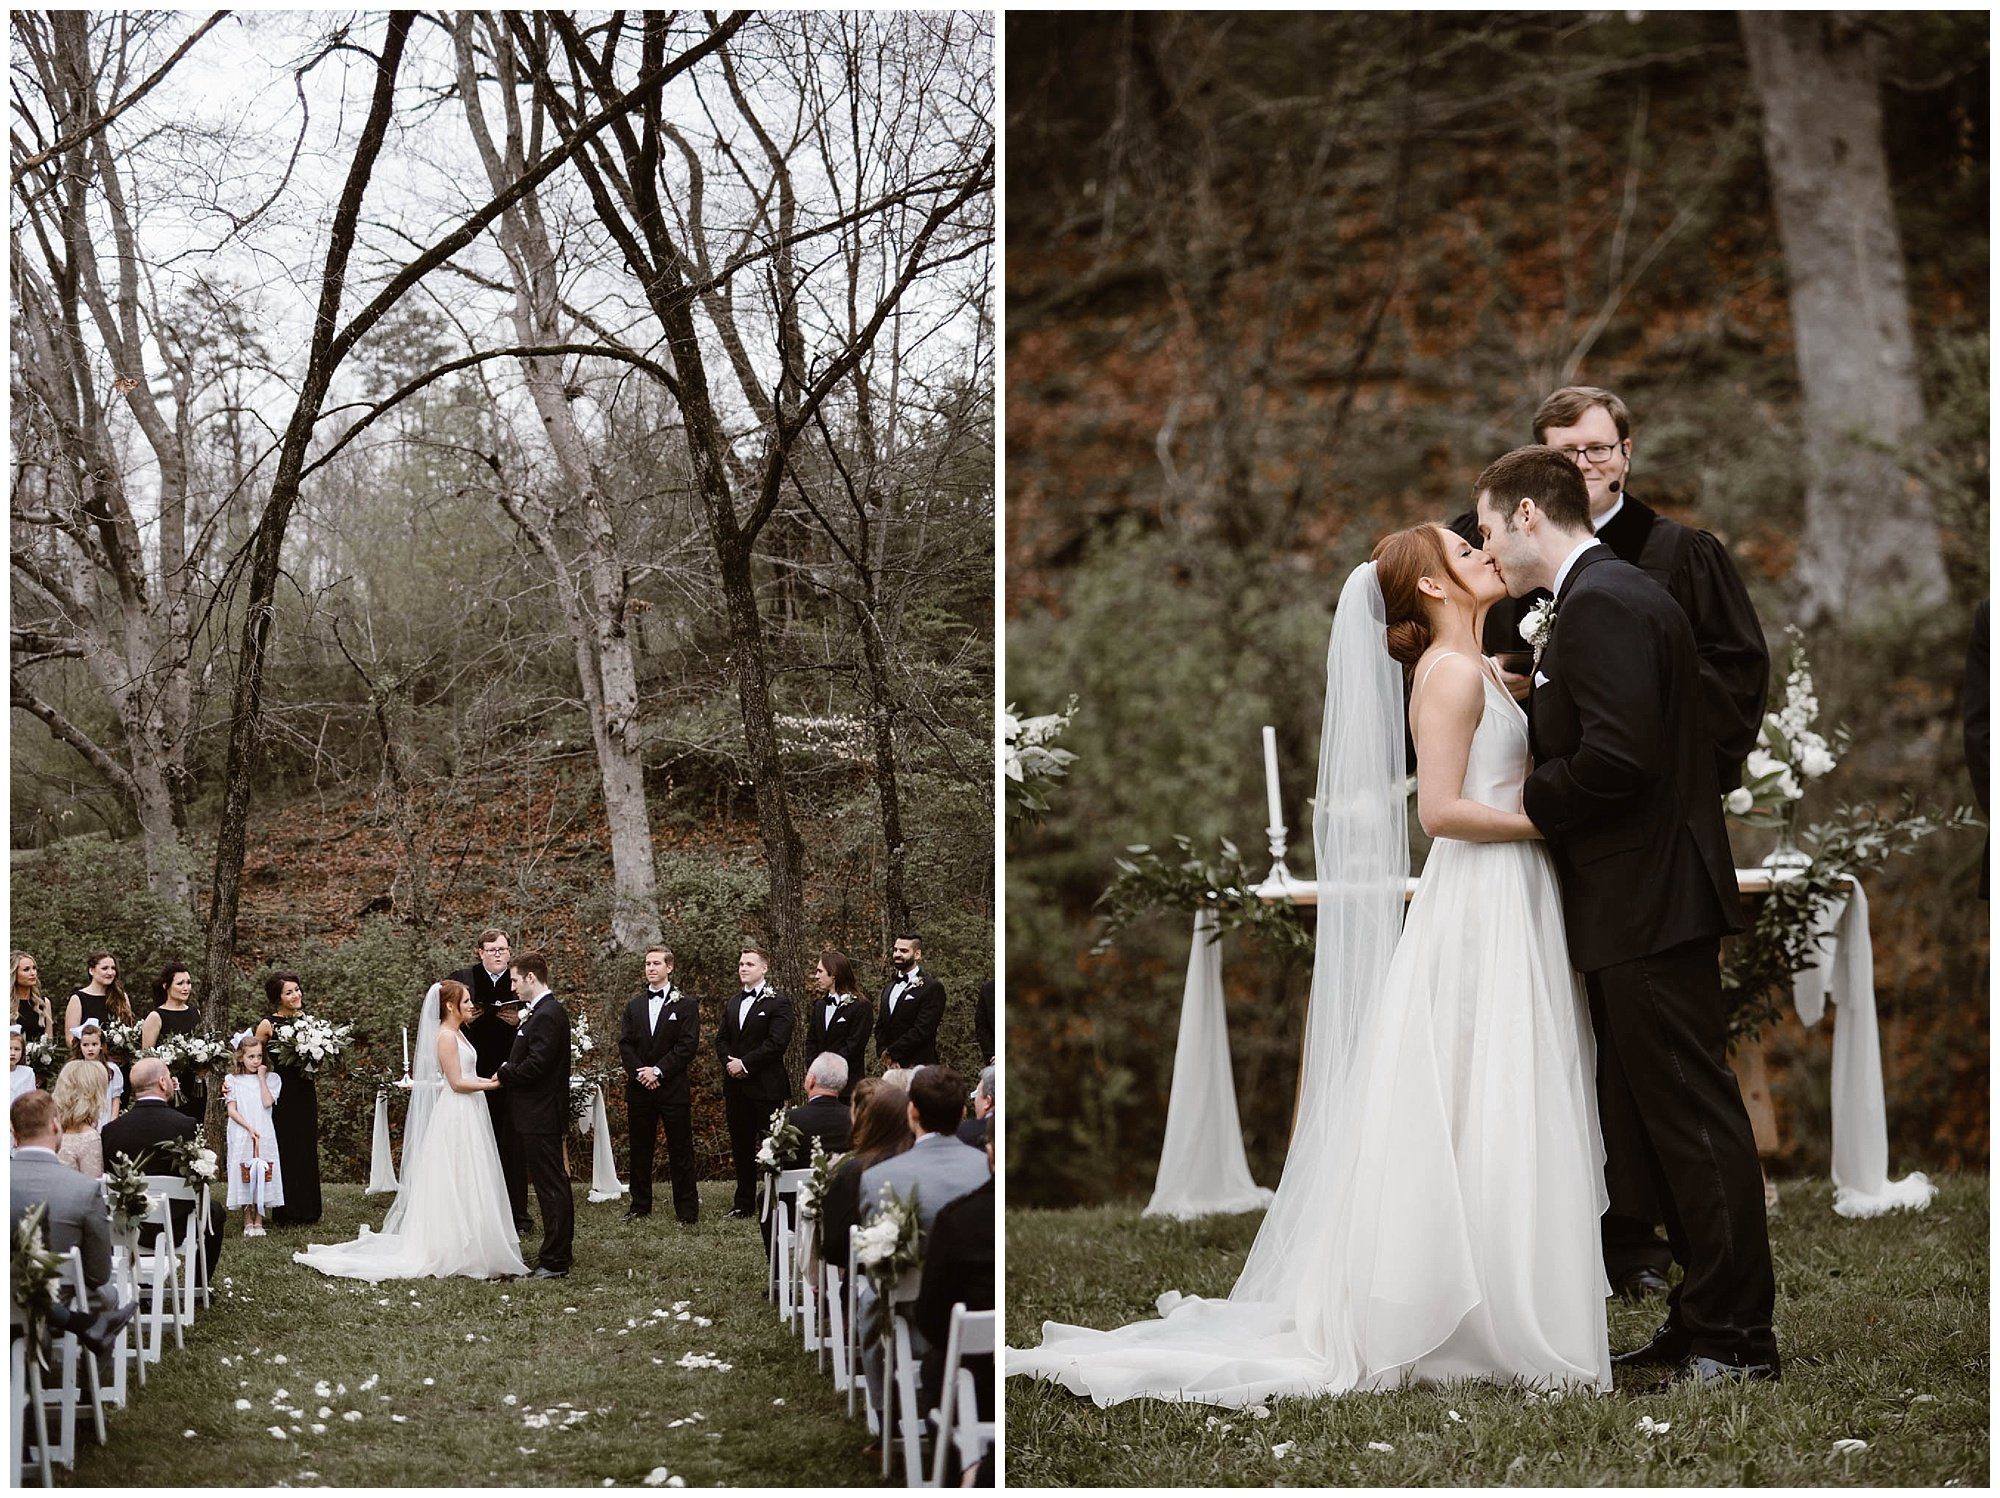 First Kiss at wedding on wedding day 